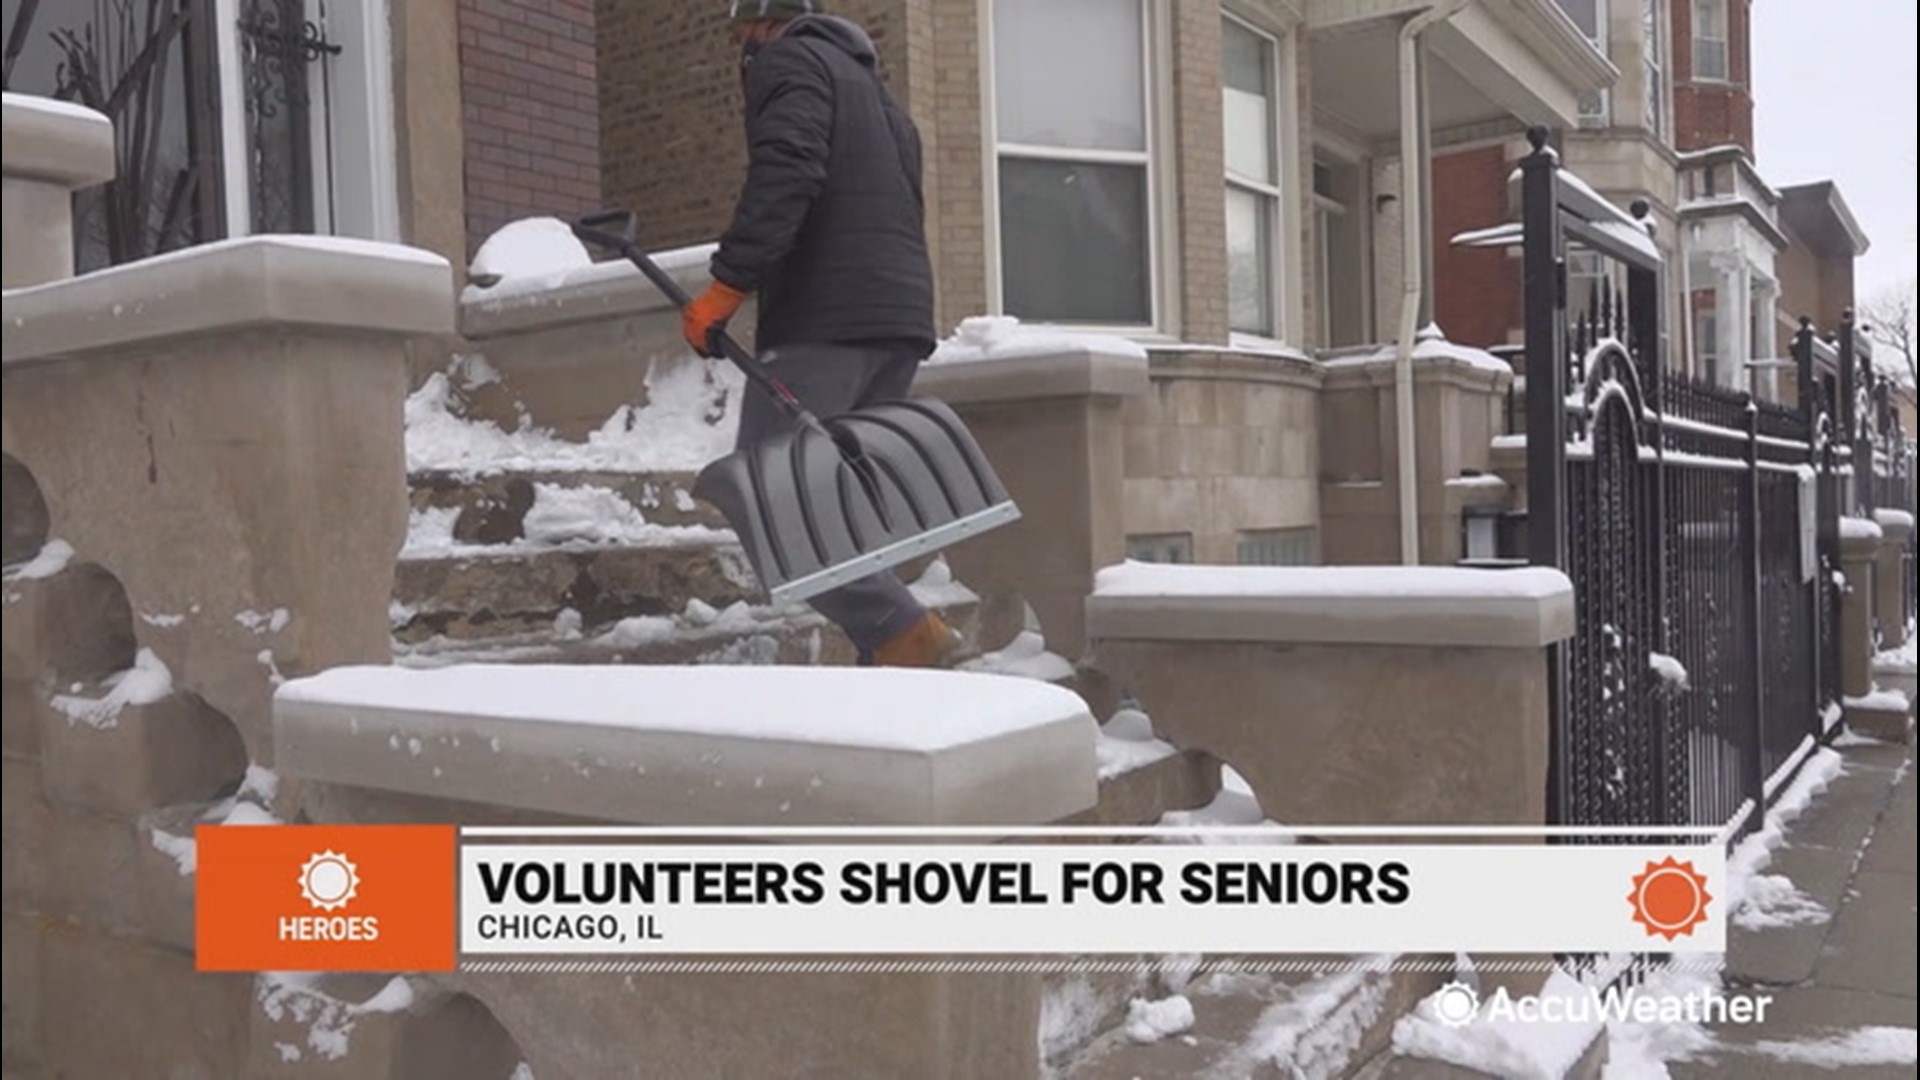 After Chicago received several inches of snow on Jan. 25 - hundreds of volunteers shoveled snow around the city for senior citizens.